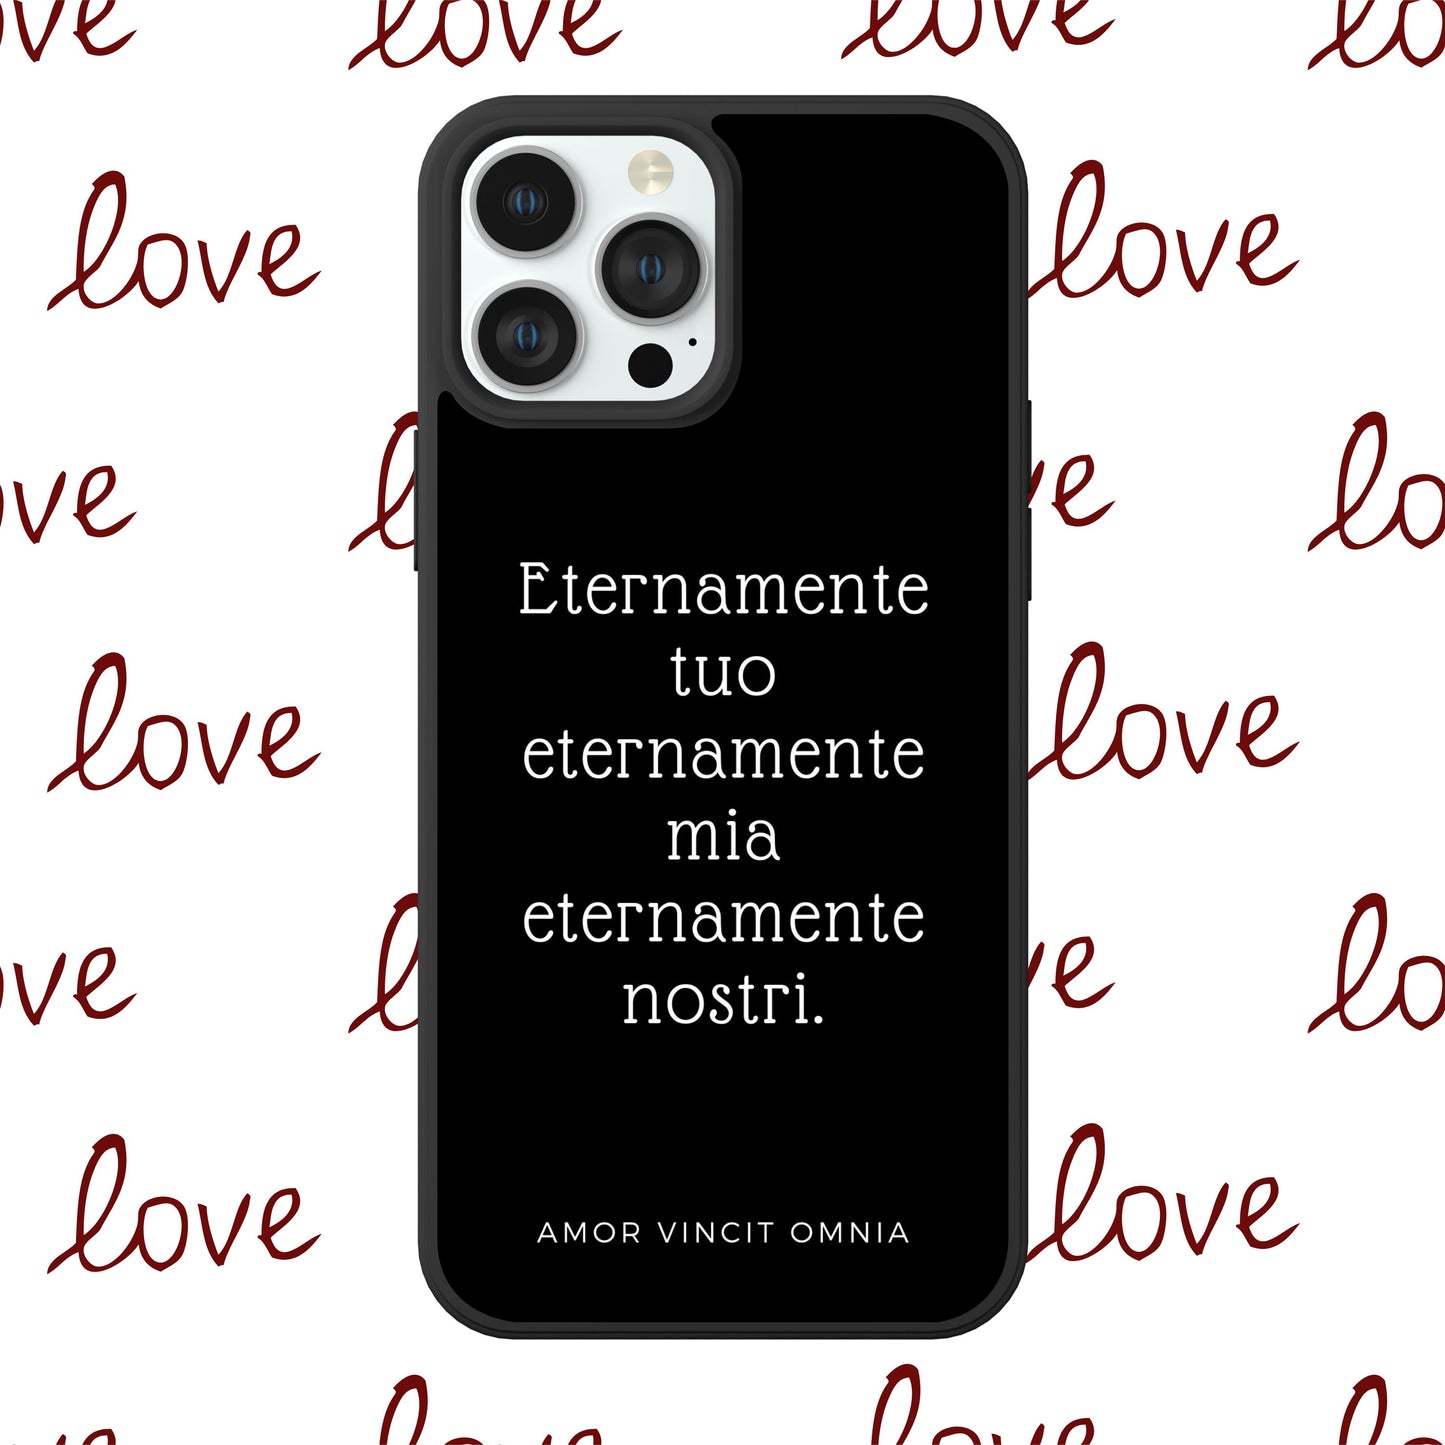 2. COVER LOVE IS